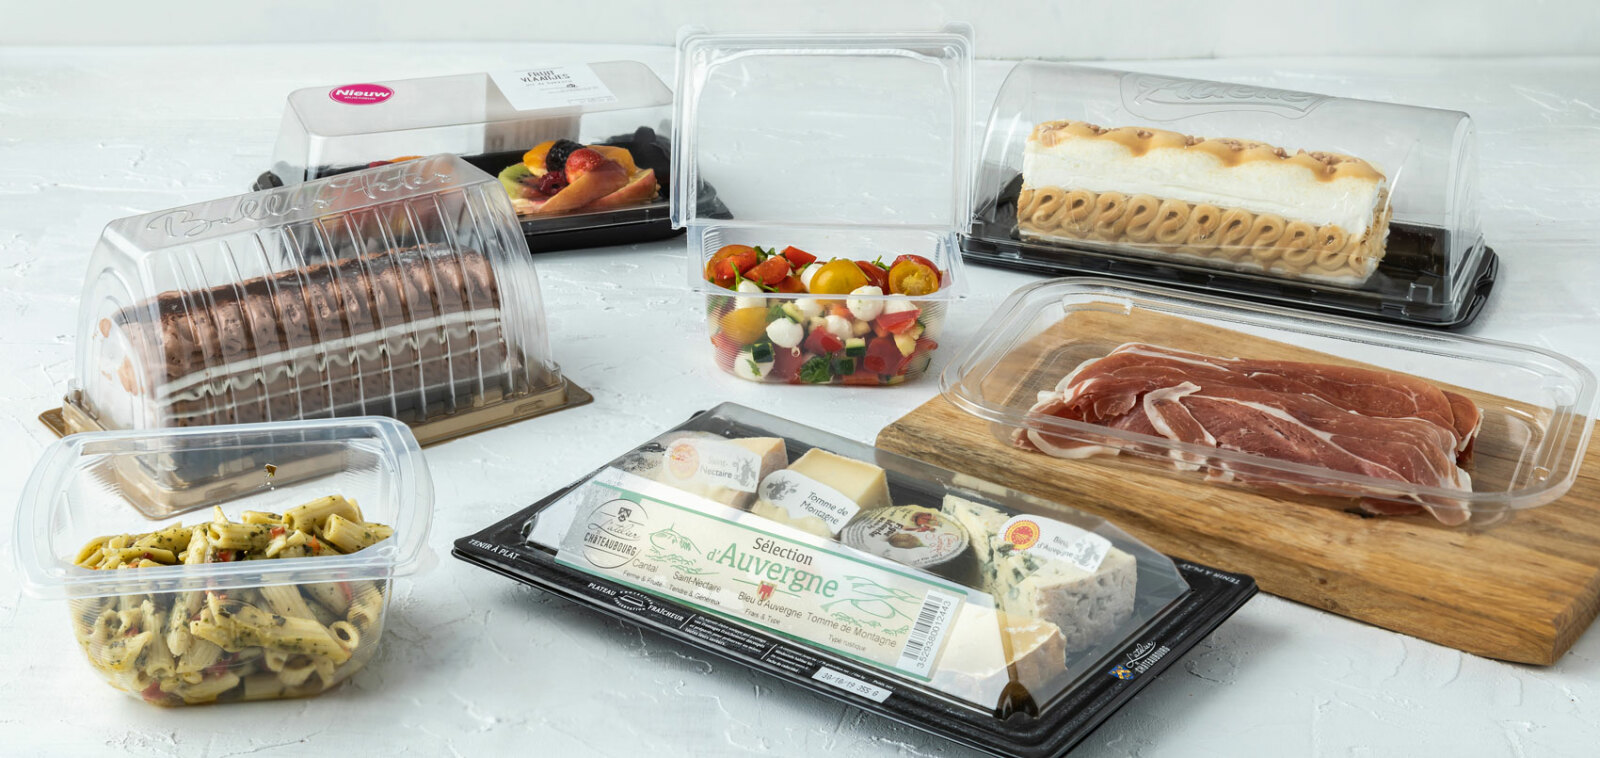 delicatessen and cake in thermoformed packaging